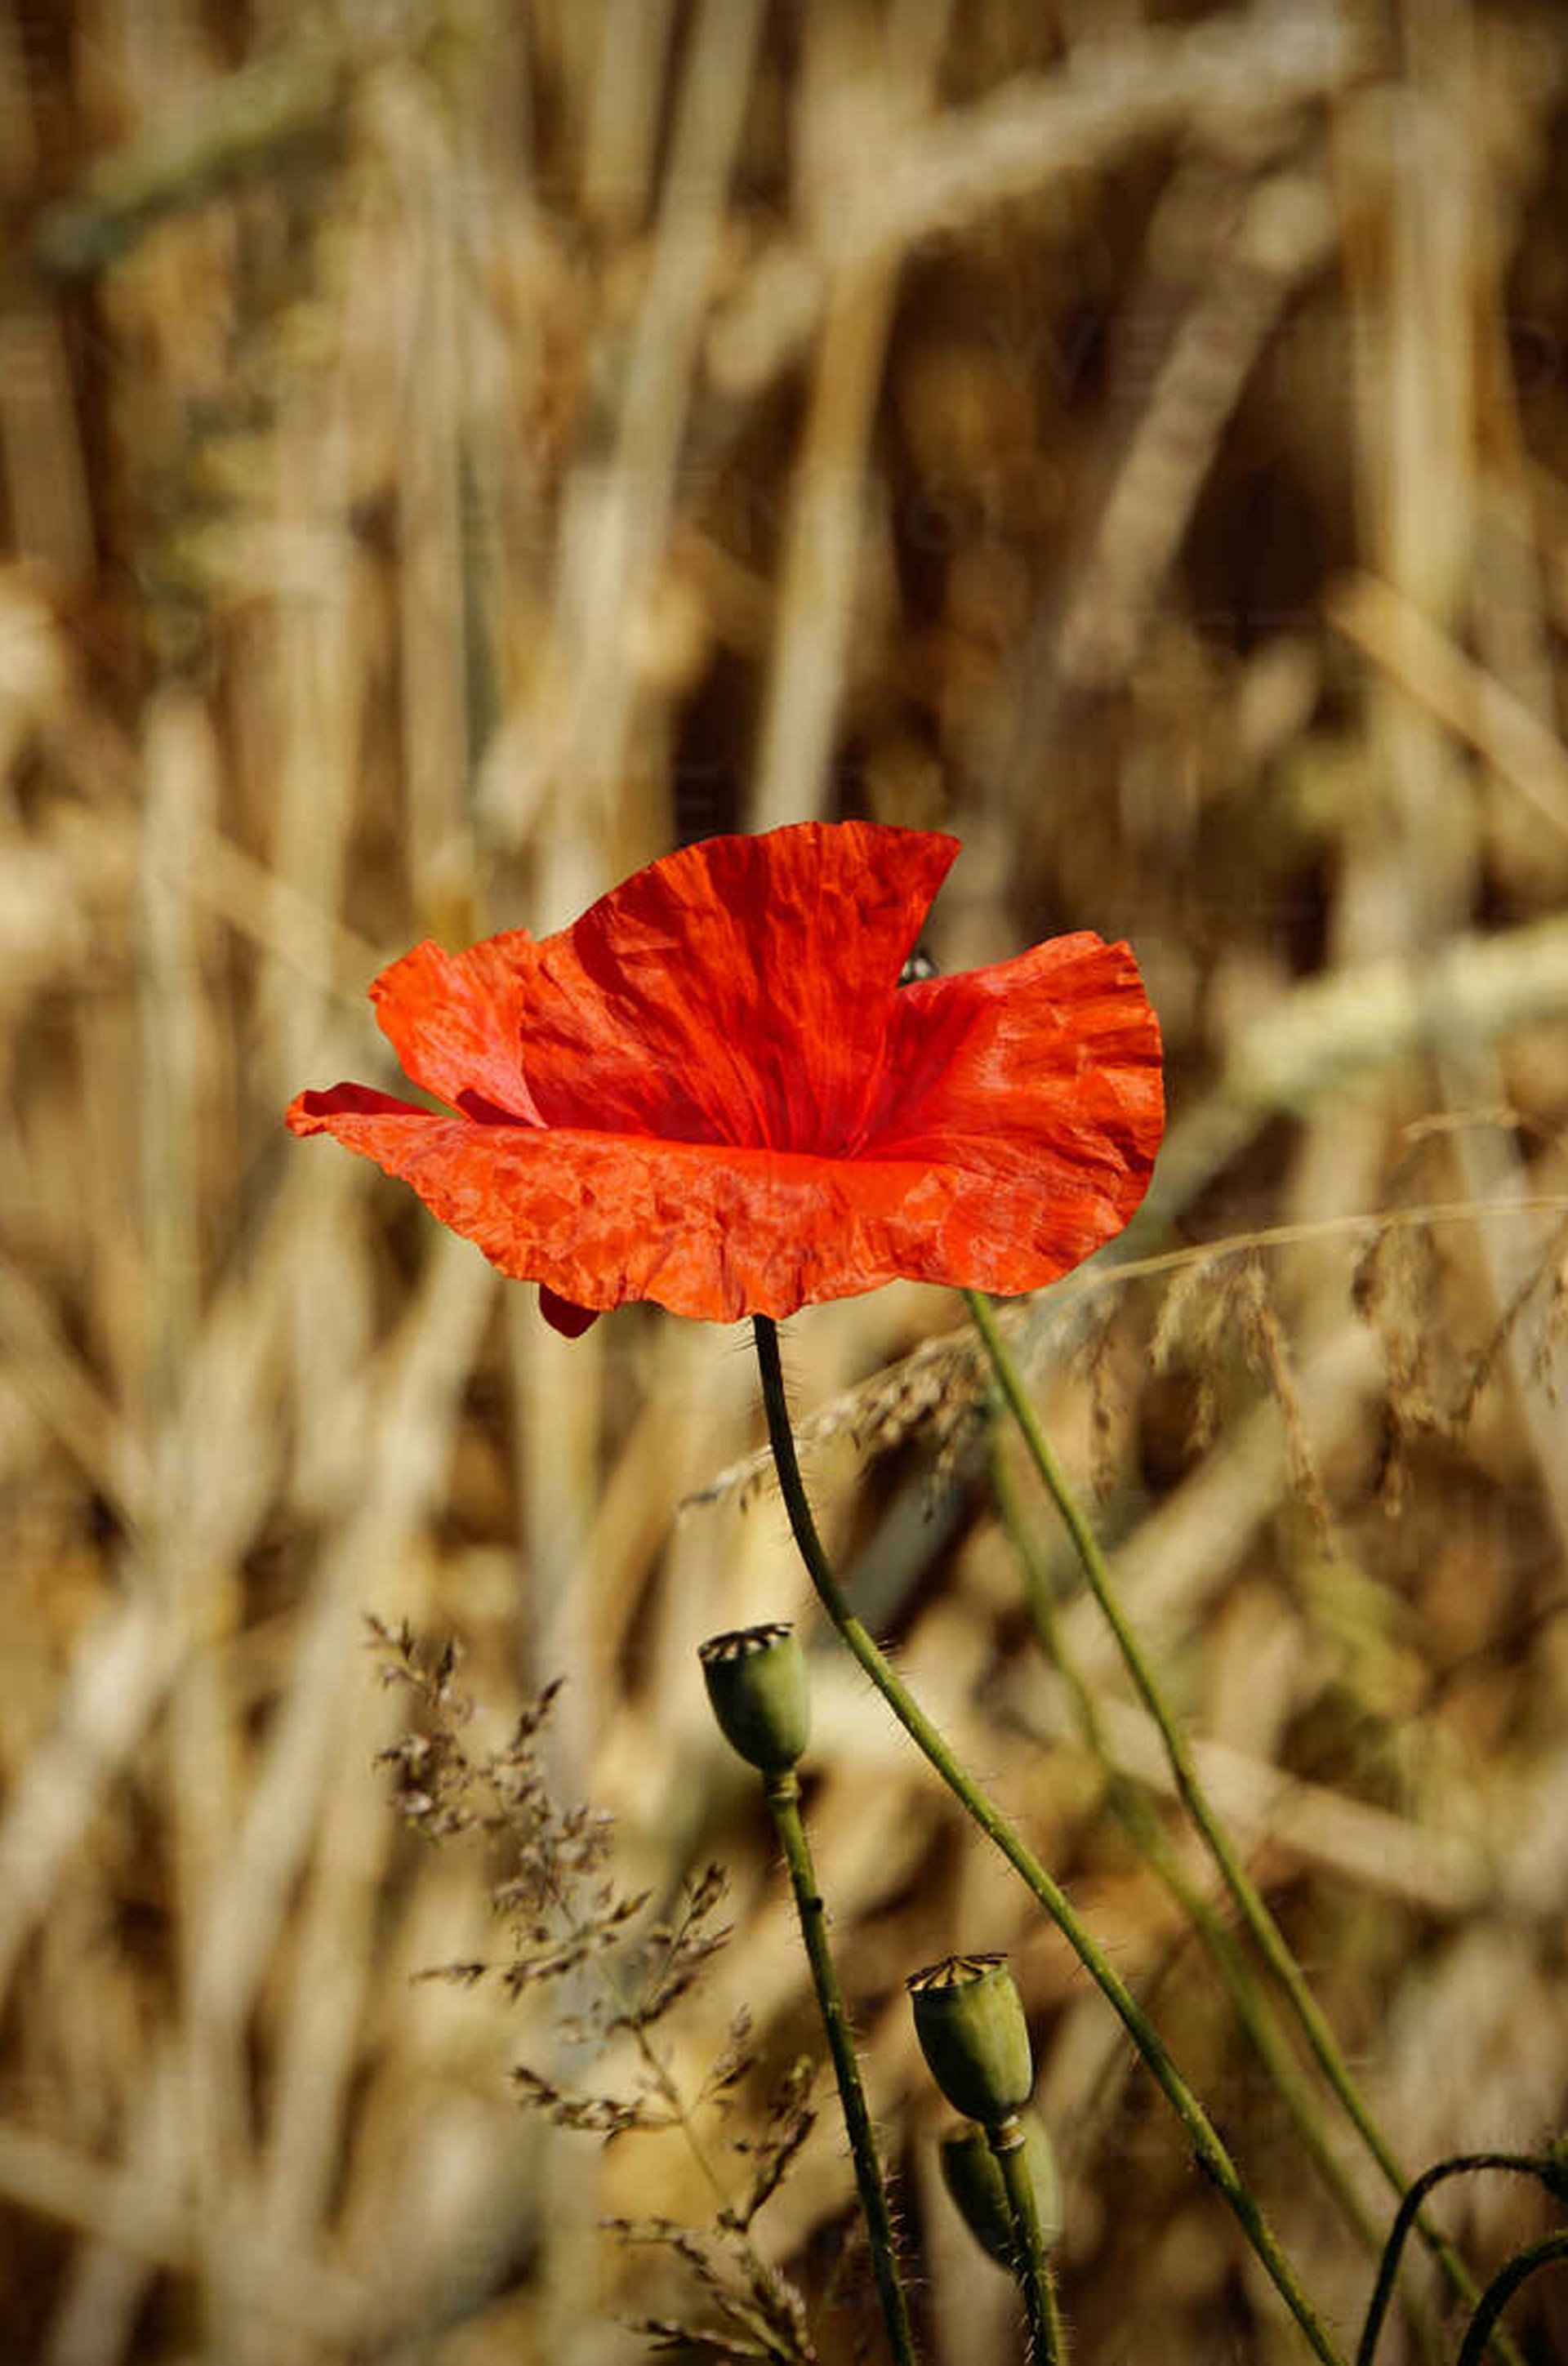 blossom-of-red-poppy-papaver-rhoeas-in-front-of-a-field-HOHF000914.jpg